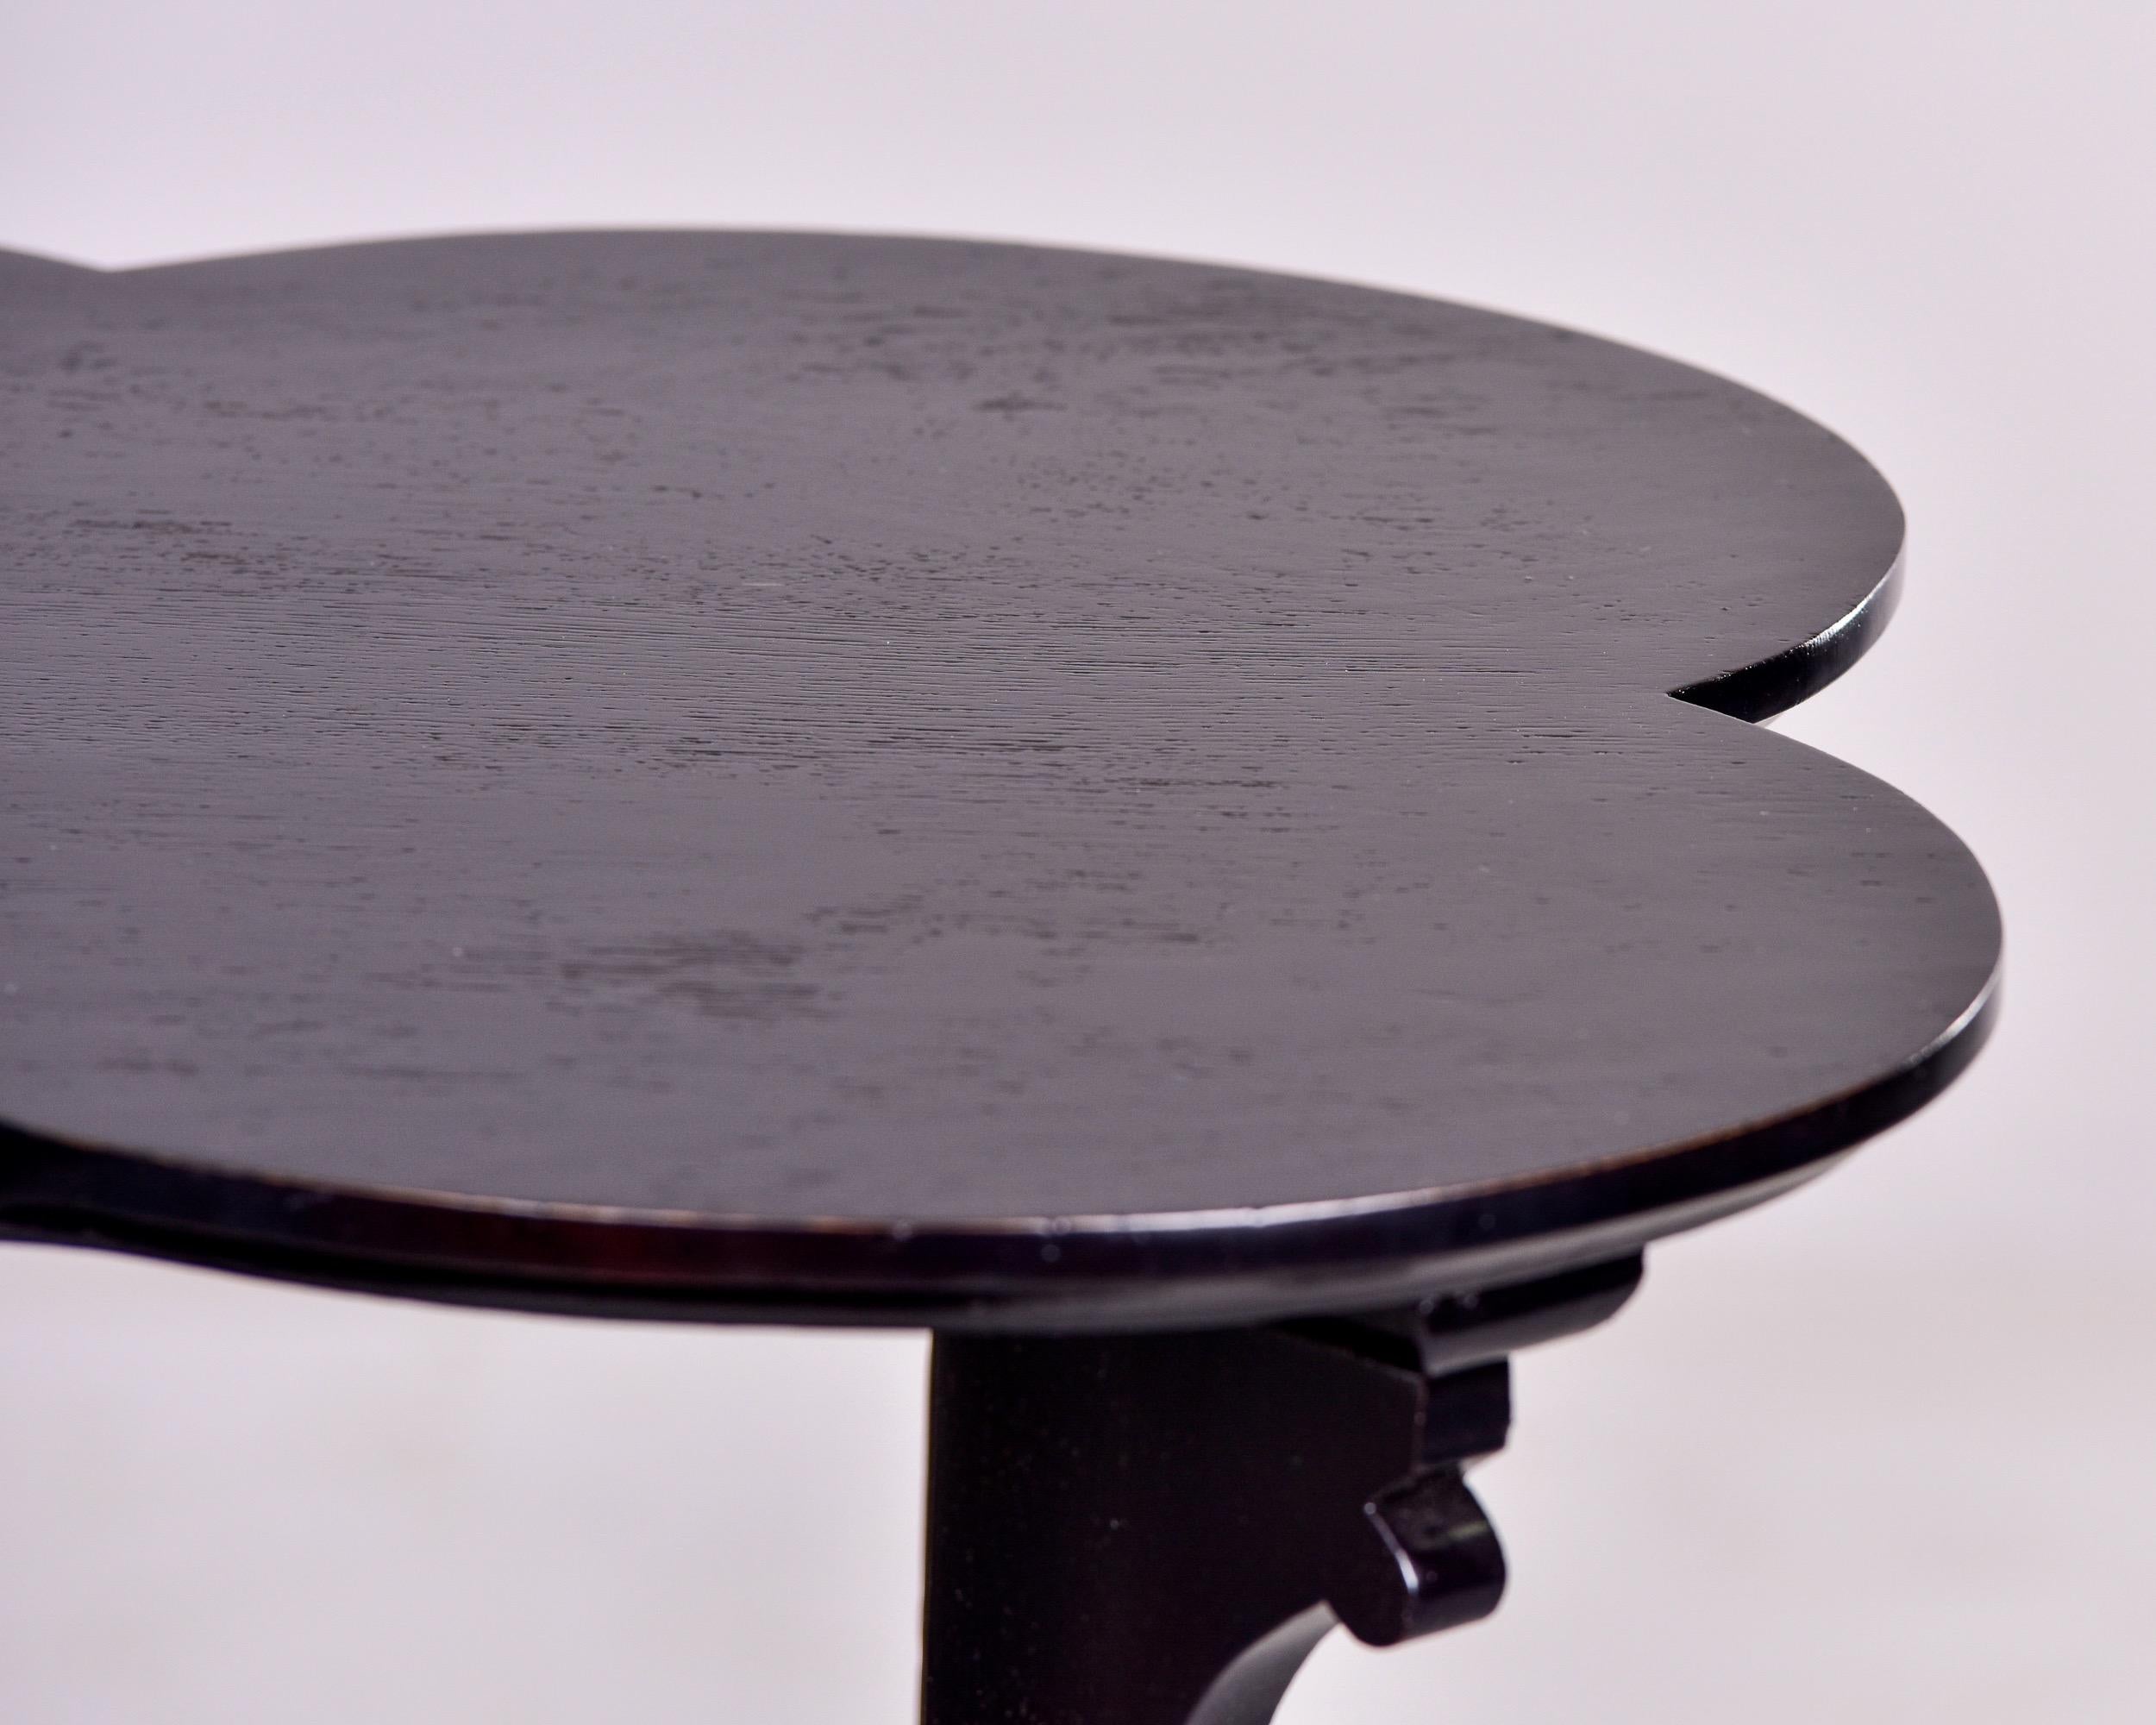 Painted French Art Deco Black Scalloped Quatrefoil Side Table For Sale